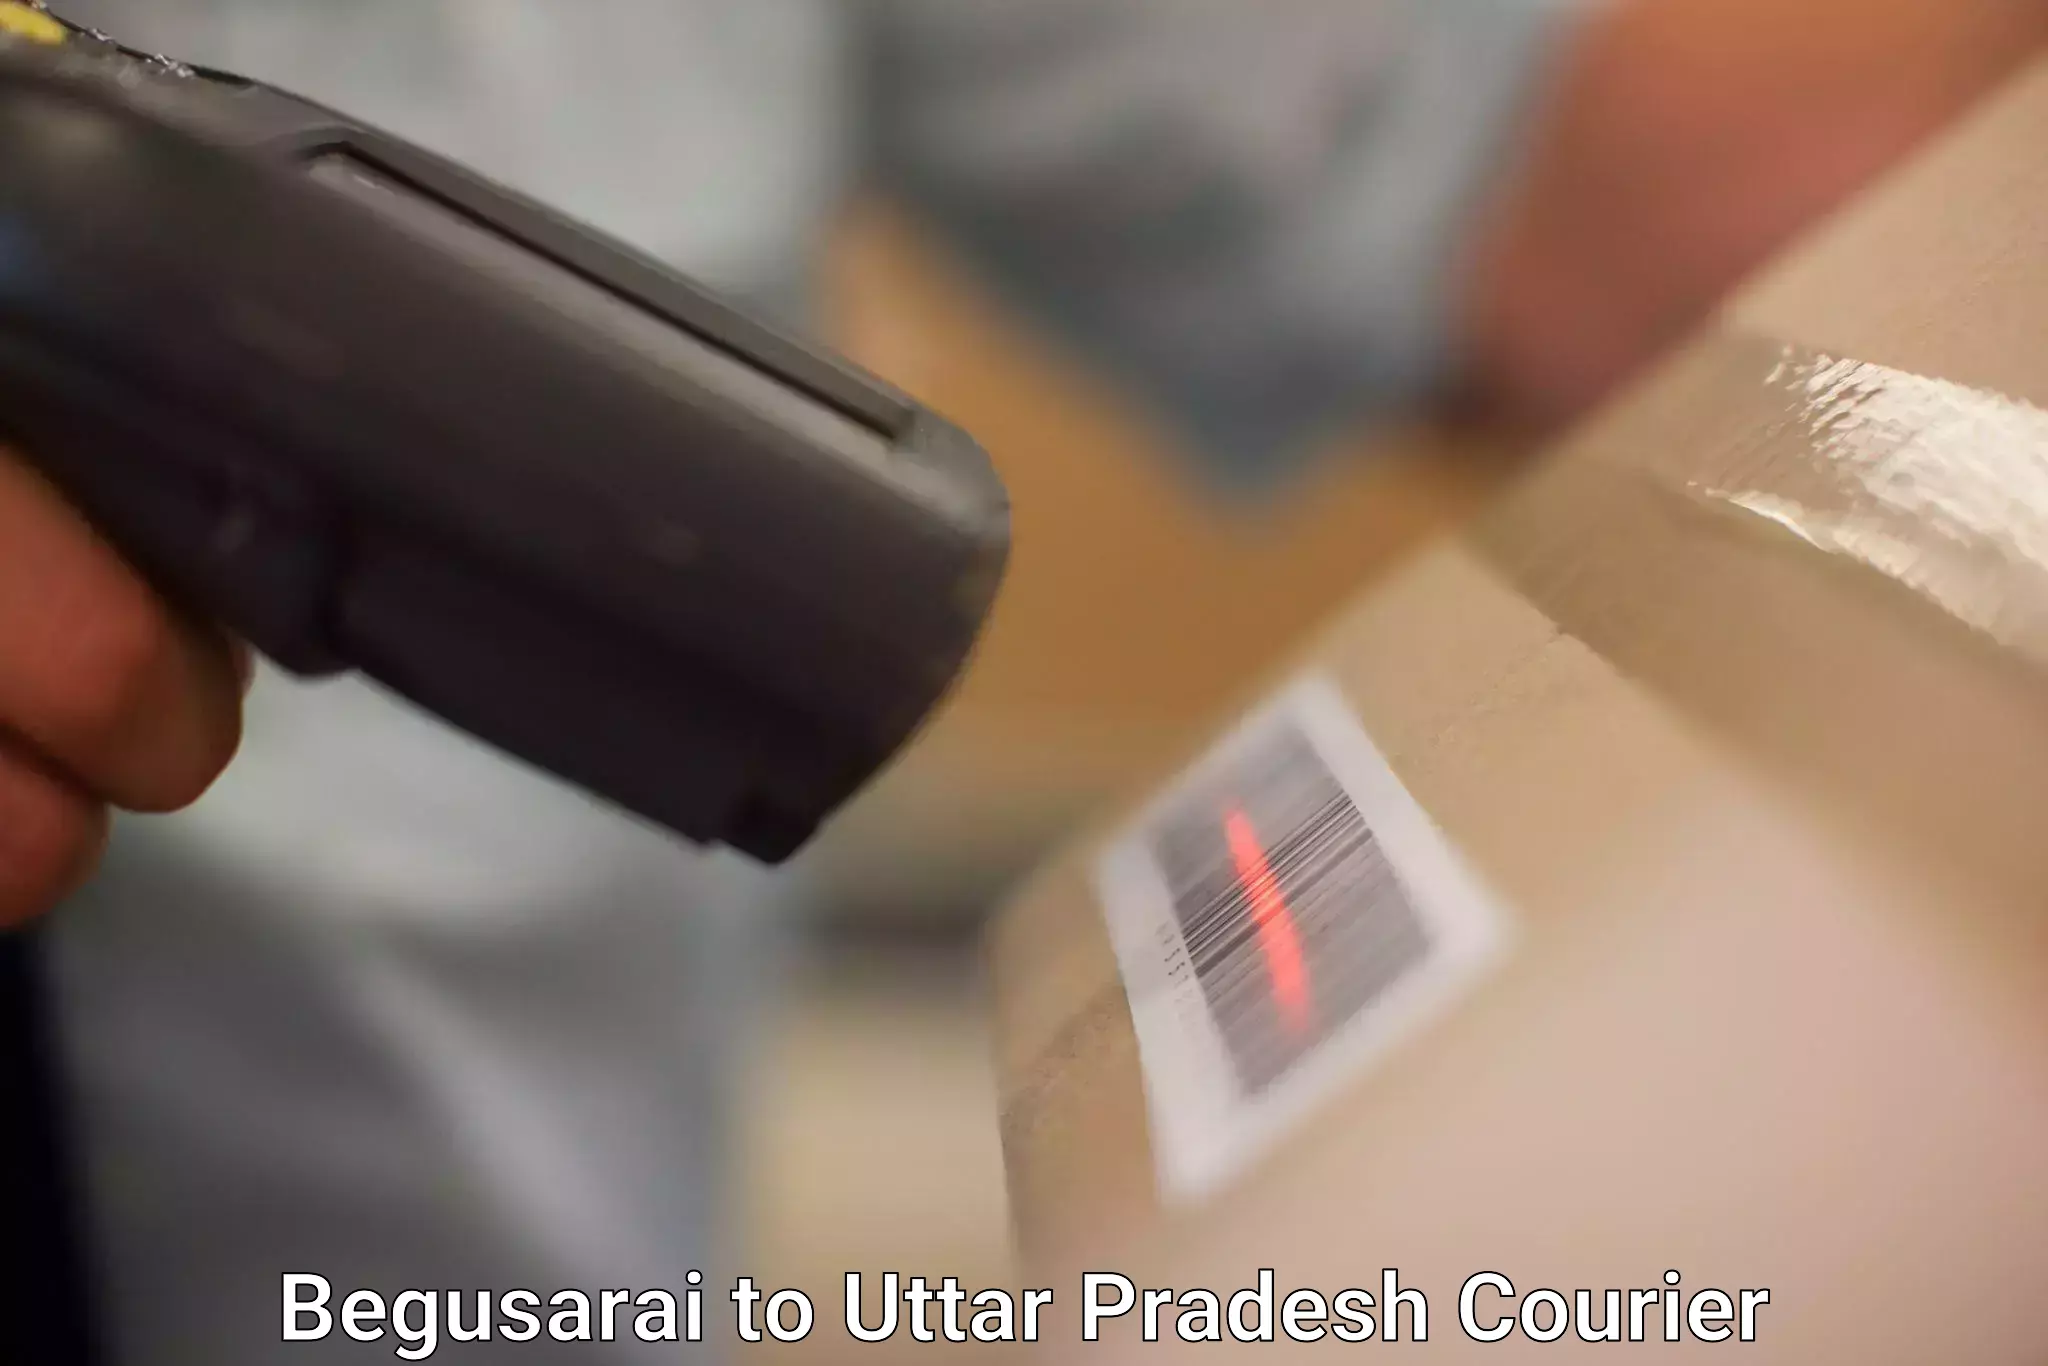 Parcel service for businesses Begusarai to Anupshahar